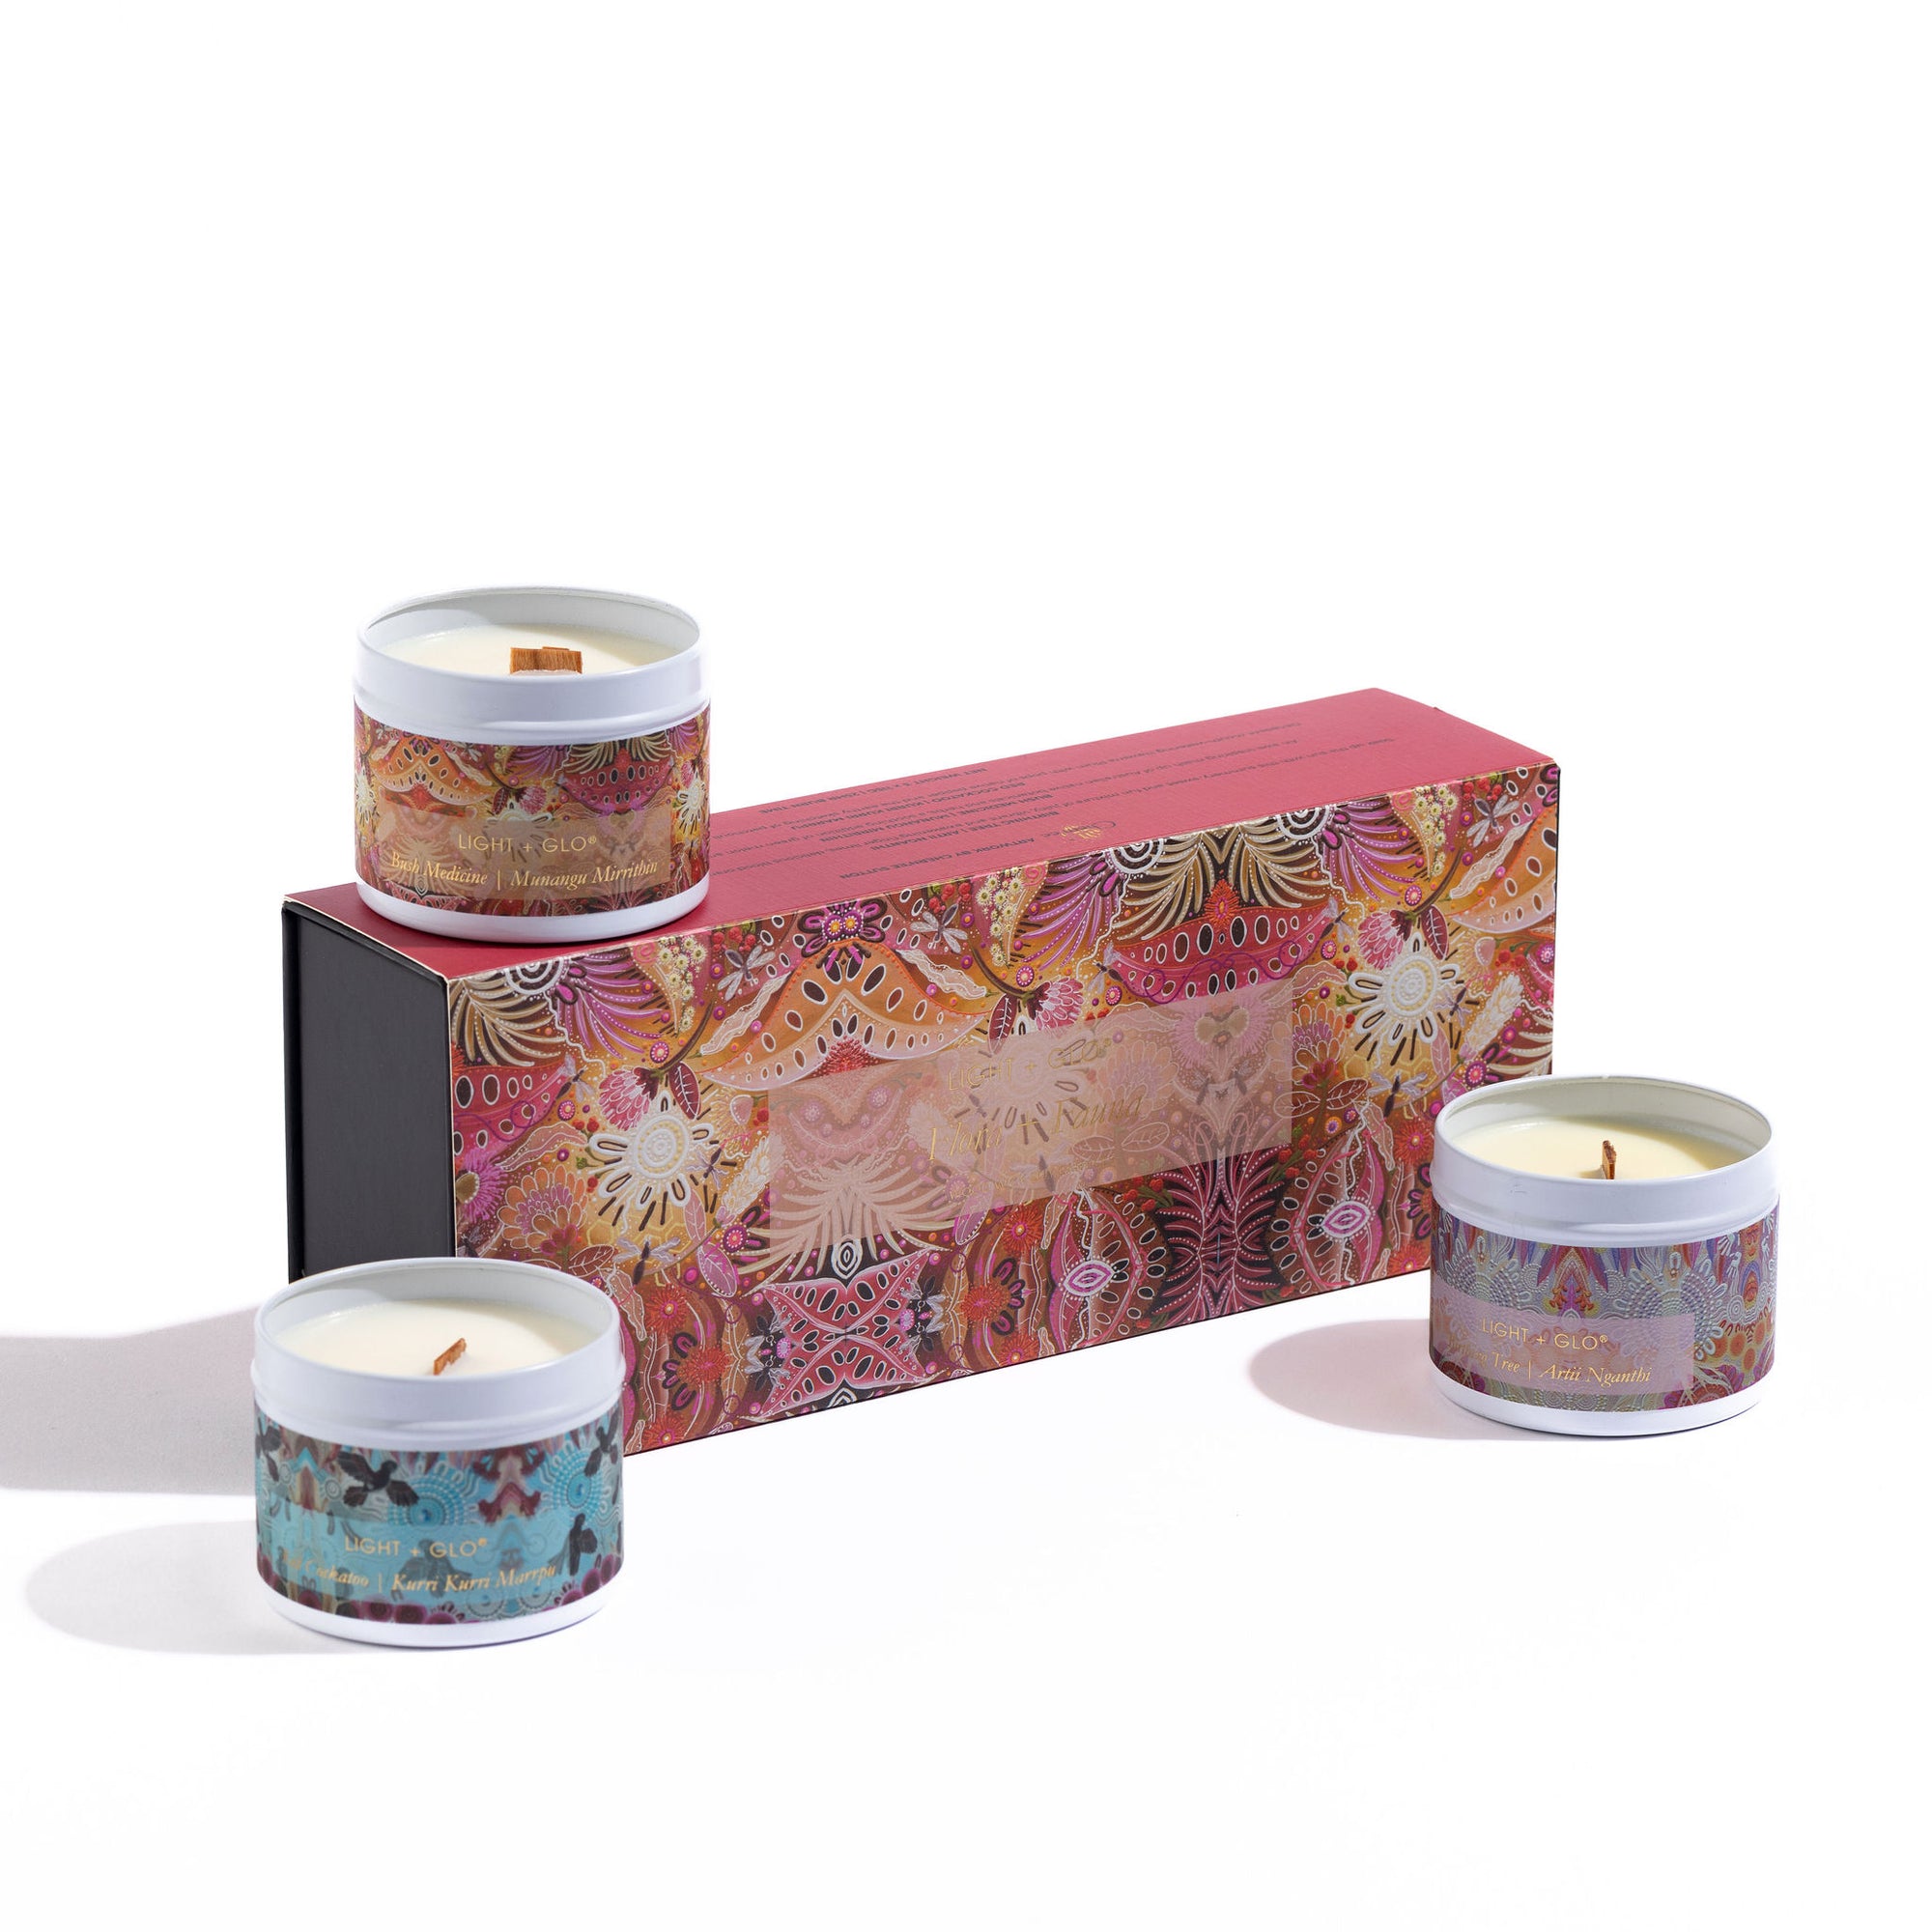 Cher'nee Sutton Travel Candle Trio Gift Set- Flora + Fauna | Luxury Candles & Home Fragrances by Light + Glo